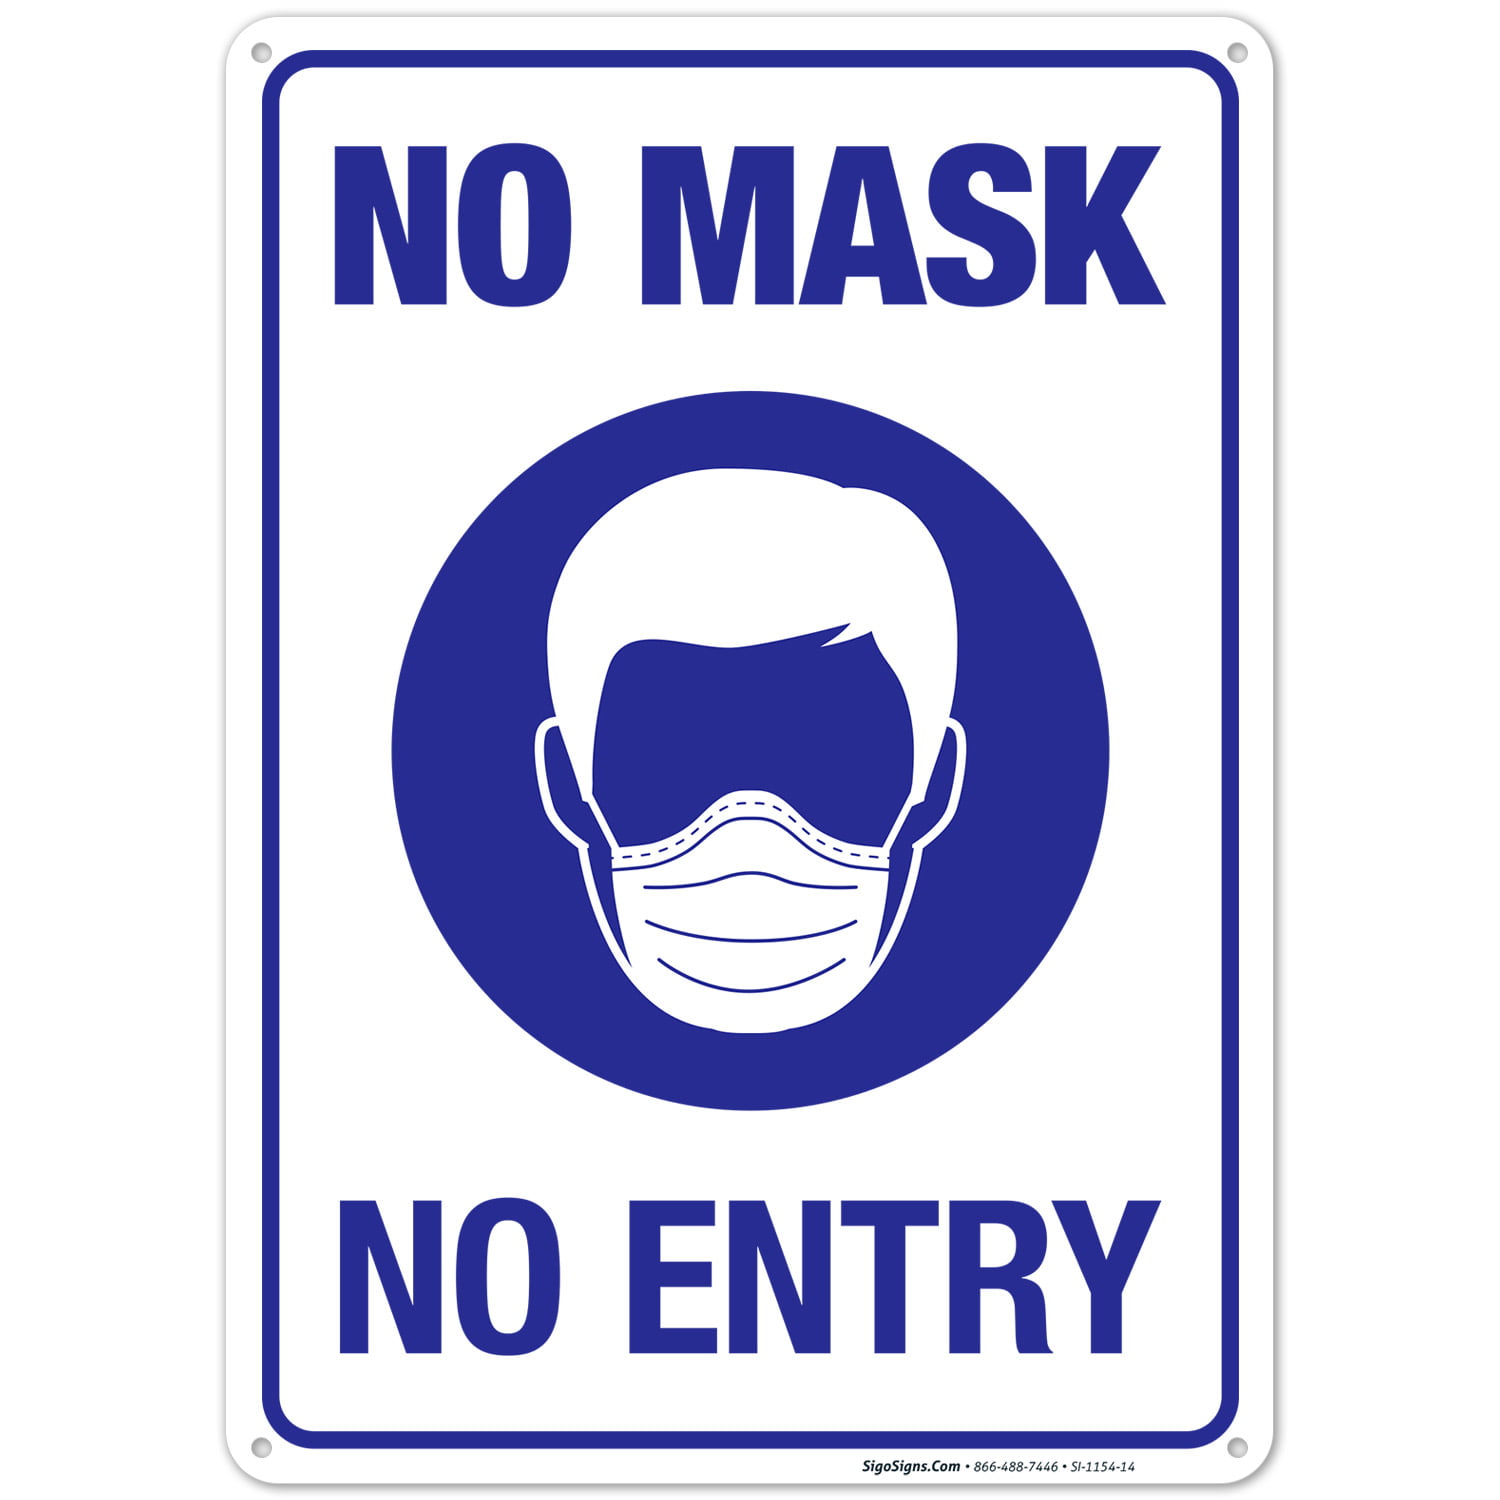 mask-required-signage